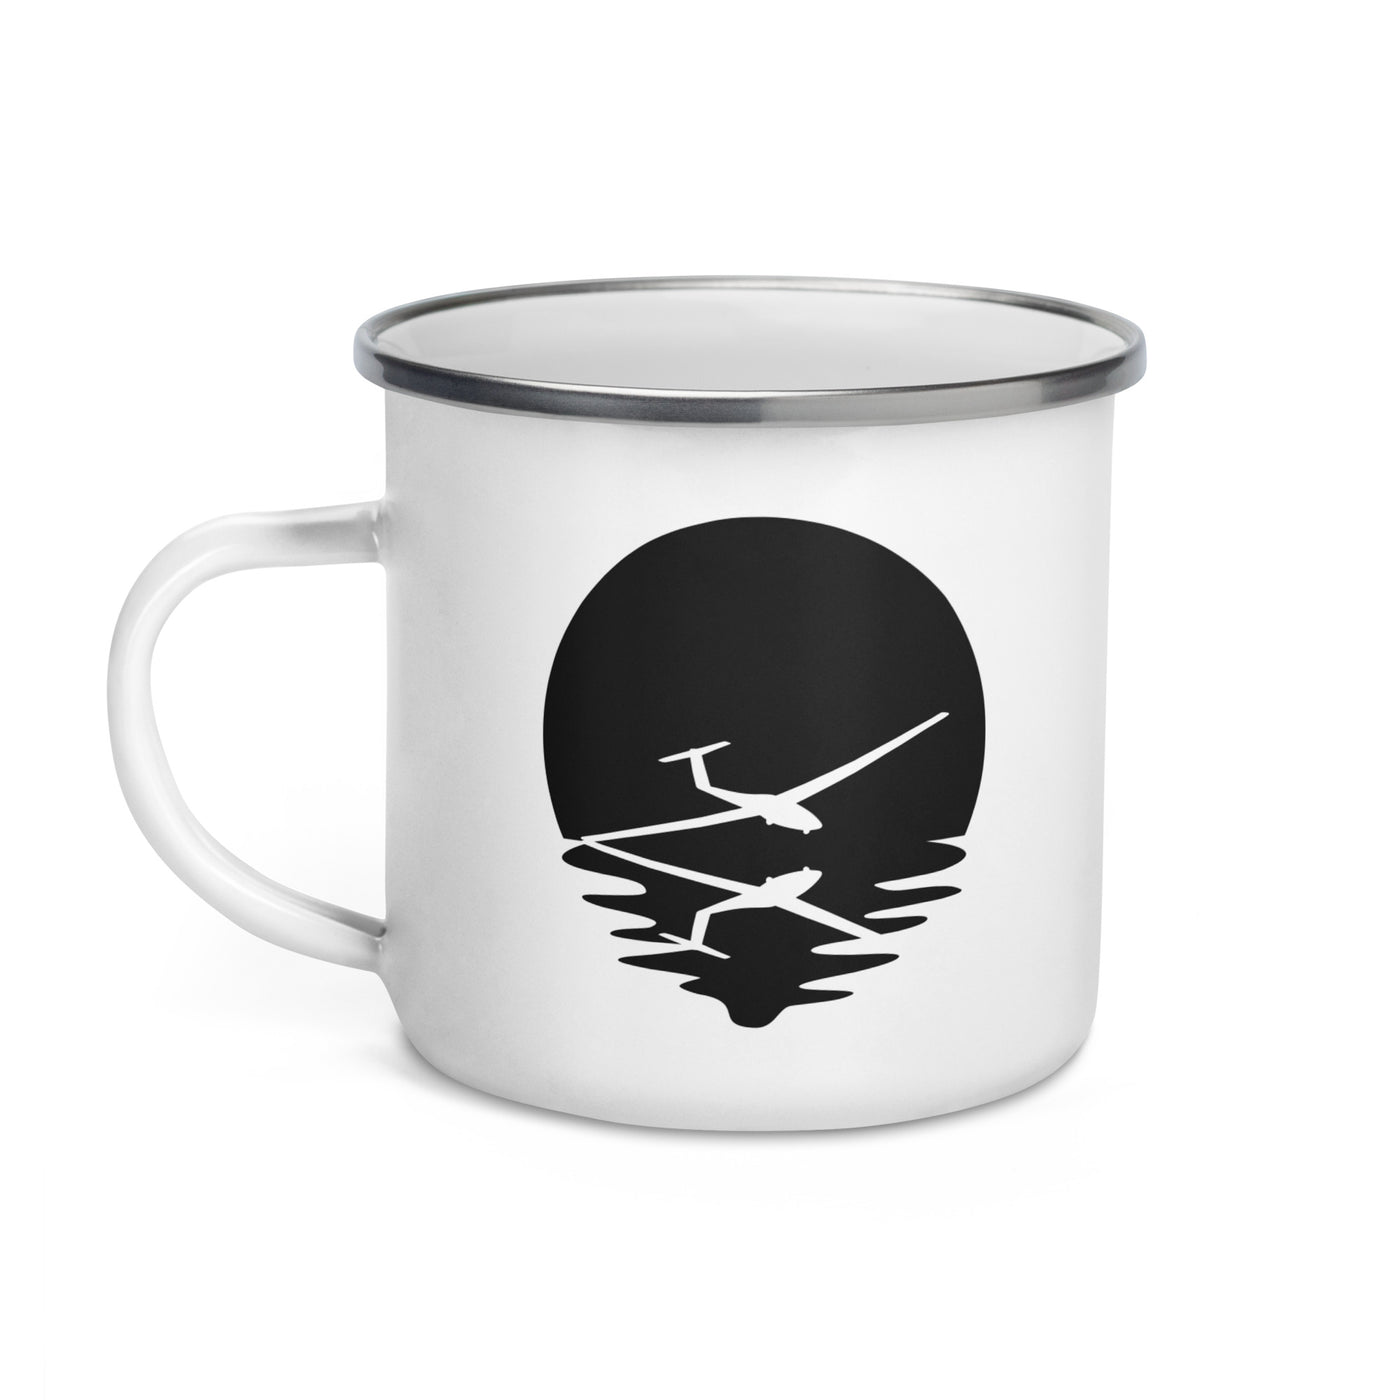 Circle And Reflection - Sailplane - Emaille Tasse berge